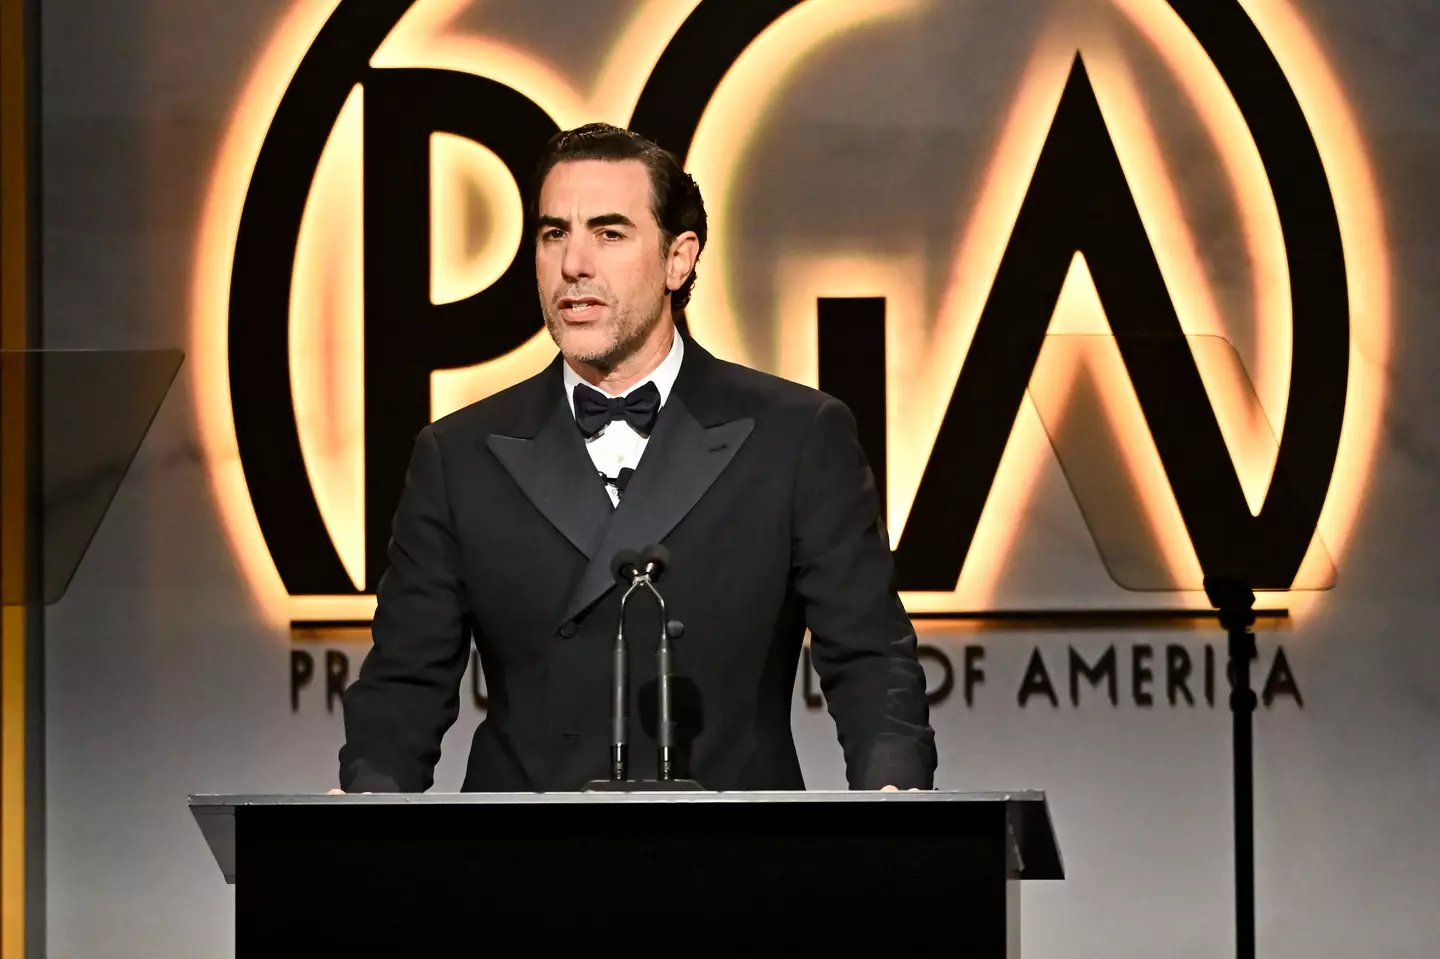 Sacha Baron Cohen's representatives have denied the claims, saying they are 'demonstrably false'.